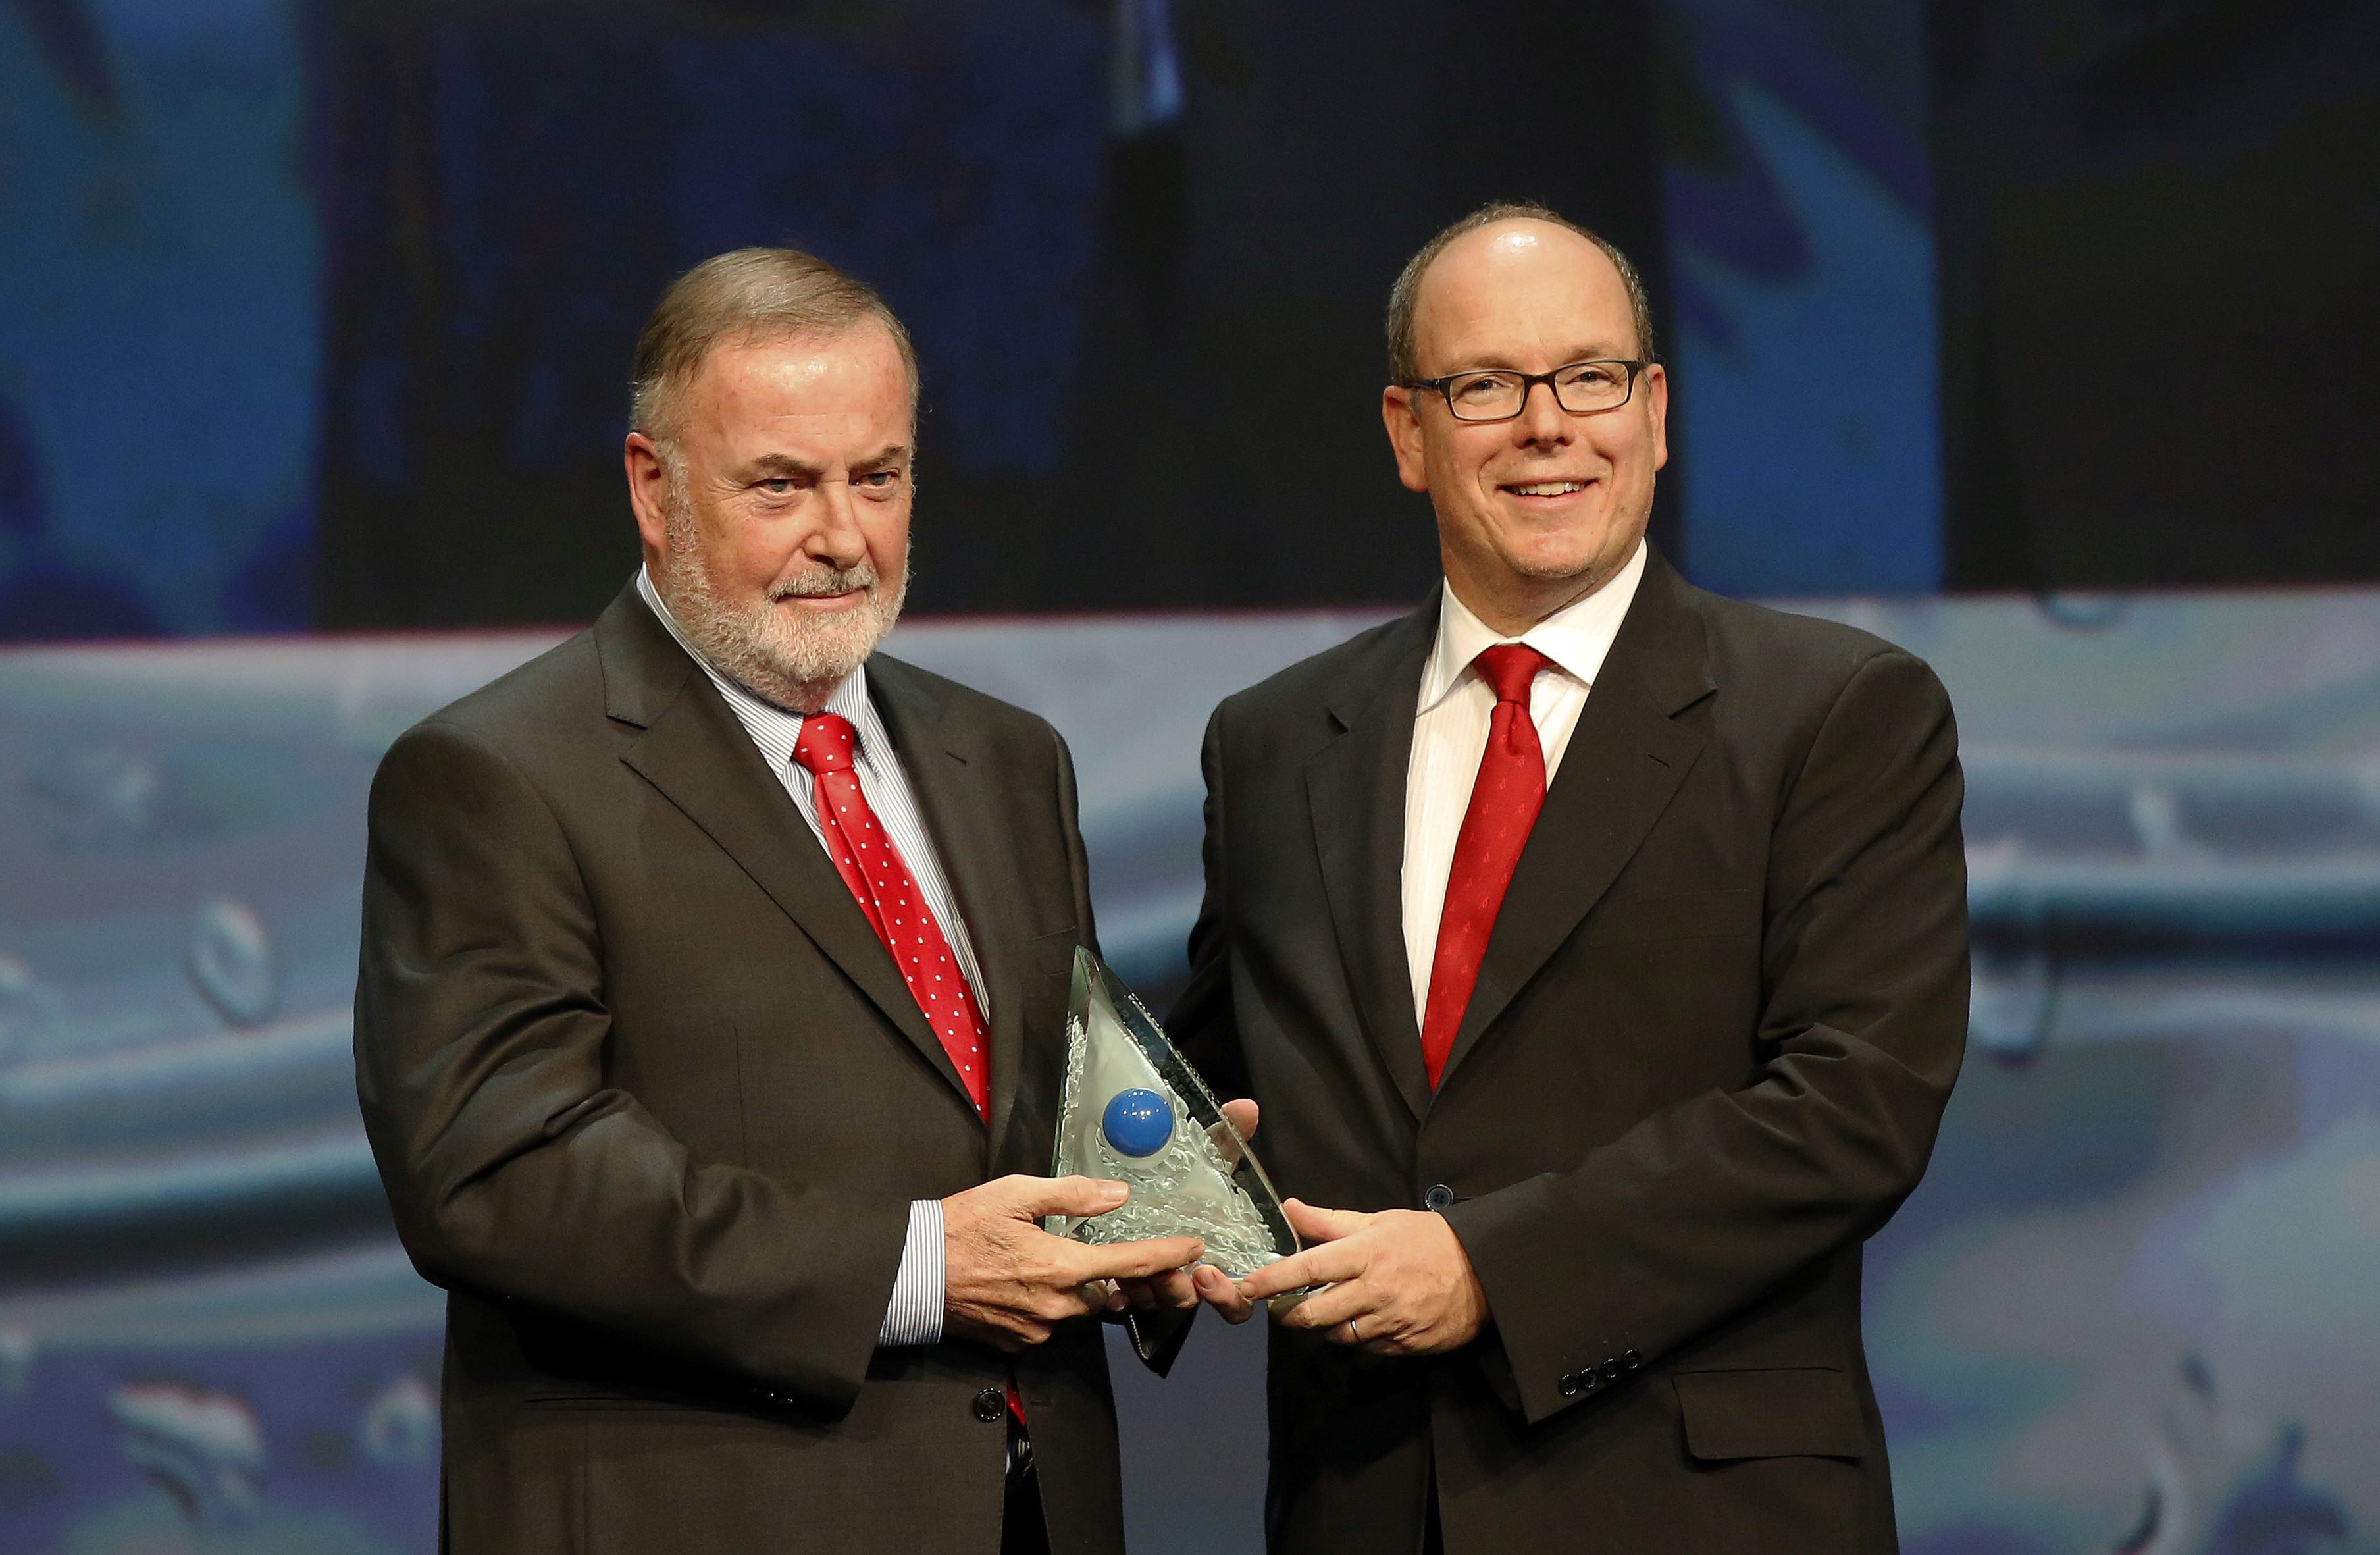 Prince Albert II of Monaco awards the Water prize to Loïc Fauchon, honorary president of the World Water Council and CEO of the Société des Eaux de Marseille, during the 8th awards ceremony of the Prince Albert II of Monaco Foundation at the Monaco Grimaldi Forum, October 2, 2015. Photo © JC Vinaj 